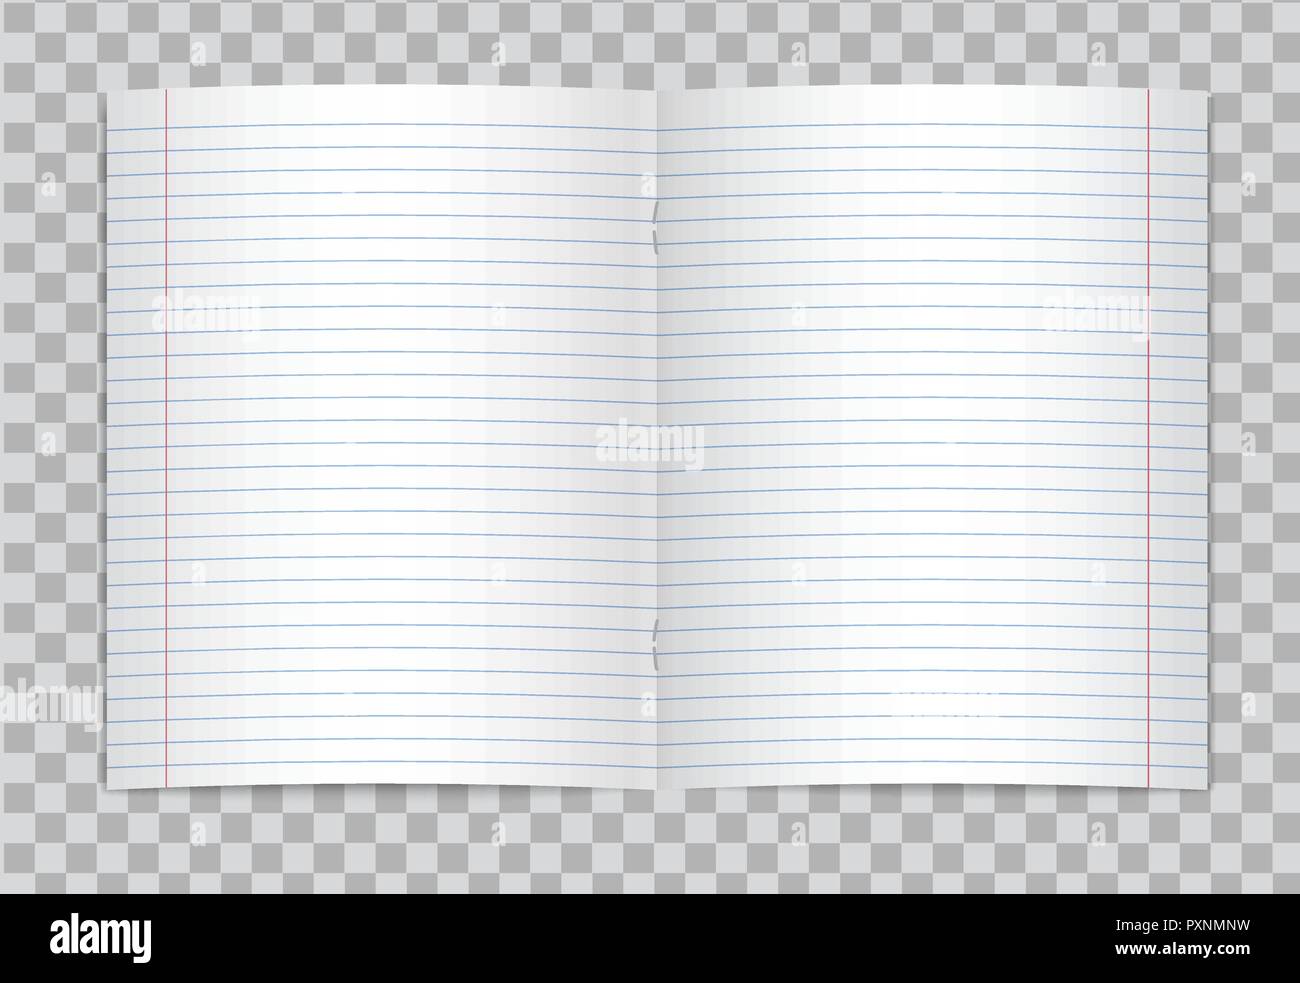 Vector opened realistic lined elementary school copybook with red margins on transparent background. Mockup or template of blank lined opened pages of Stock Vector